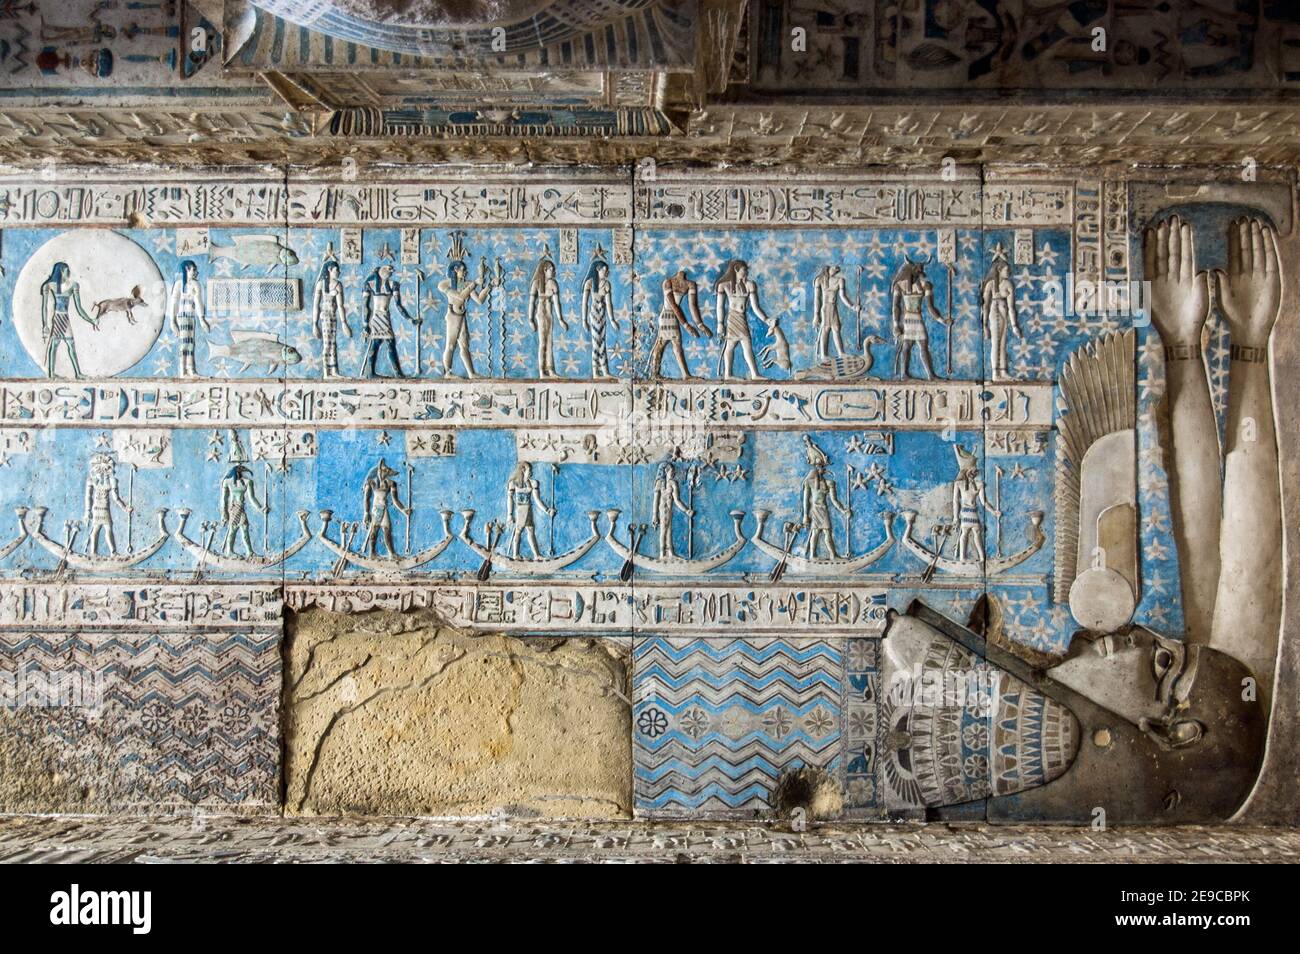 Astrological symbols on the ceiling of Dendera Temple near Qena, Egypt. The goddess of the night Nut is enclosing the symbols with her body and arms. Stock Photo